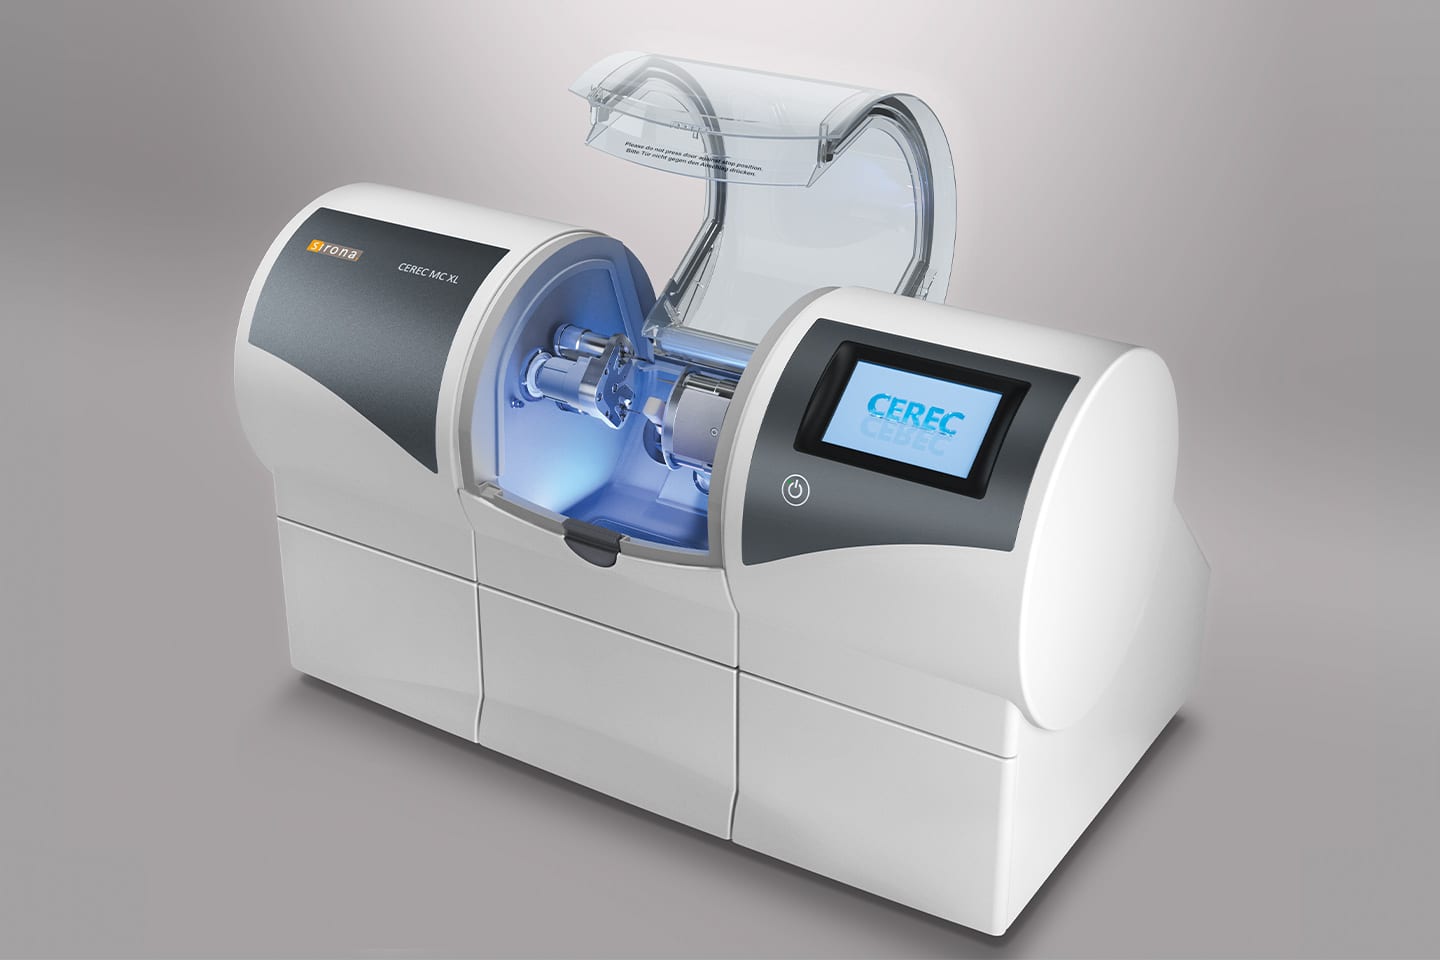 CEREC same day crowns tech for your health chattanooga dental care